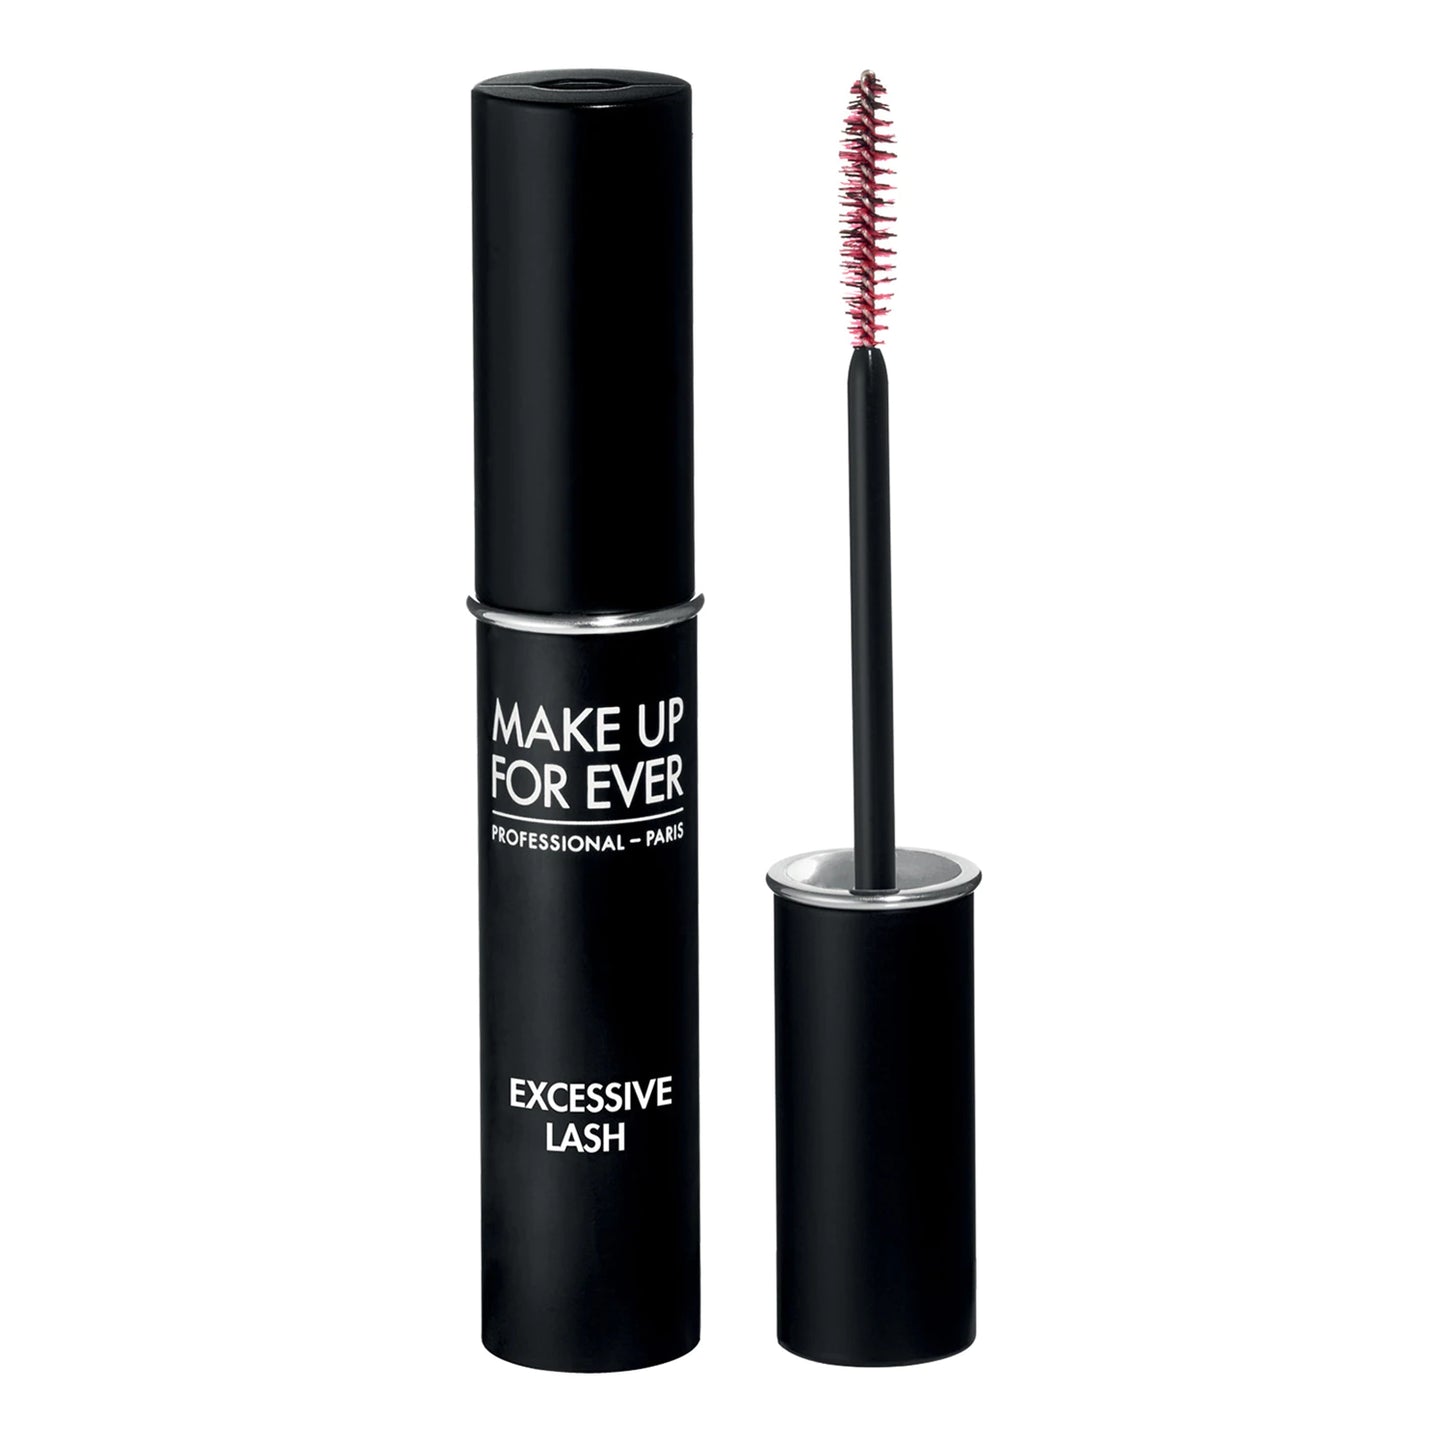 MAKE UP FOR EVER - Excessive Lash | 8.5 mL